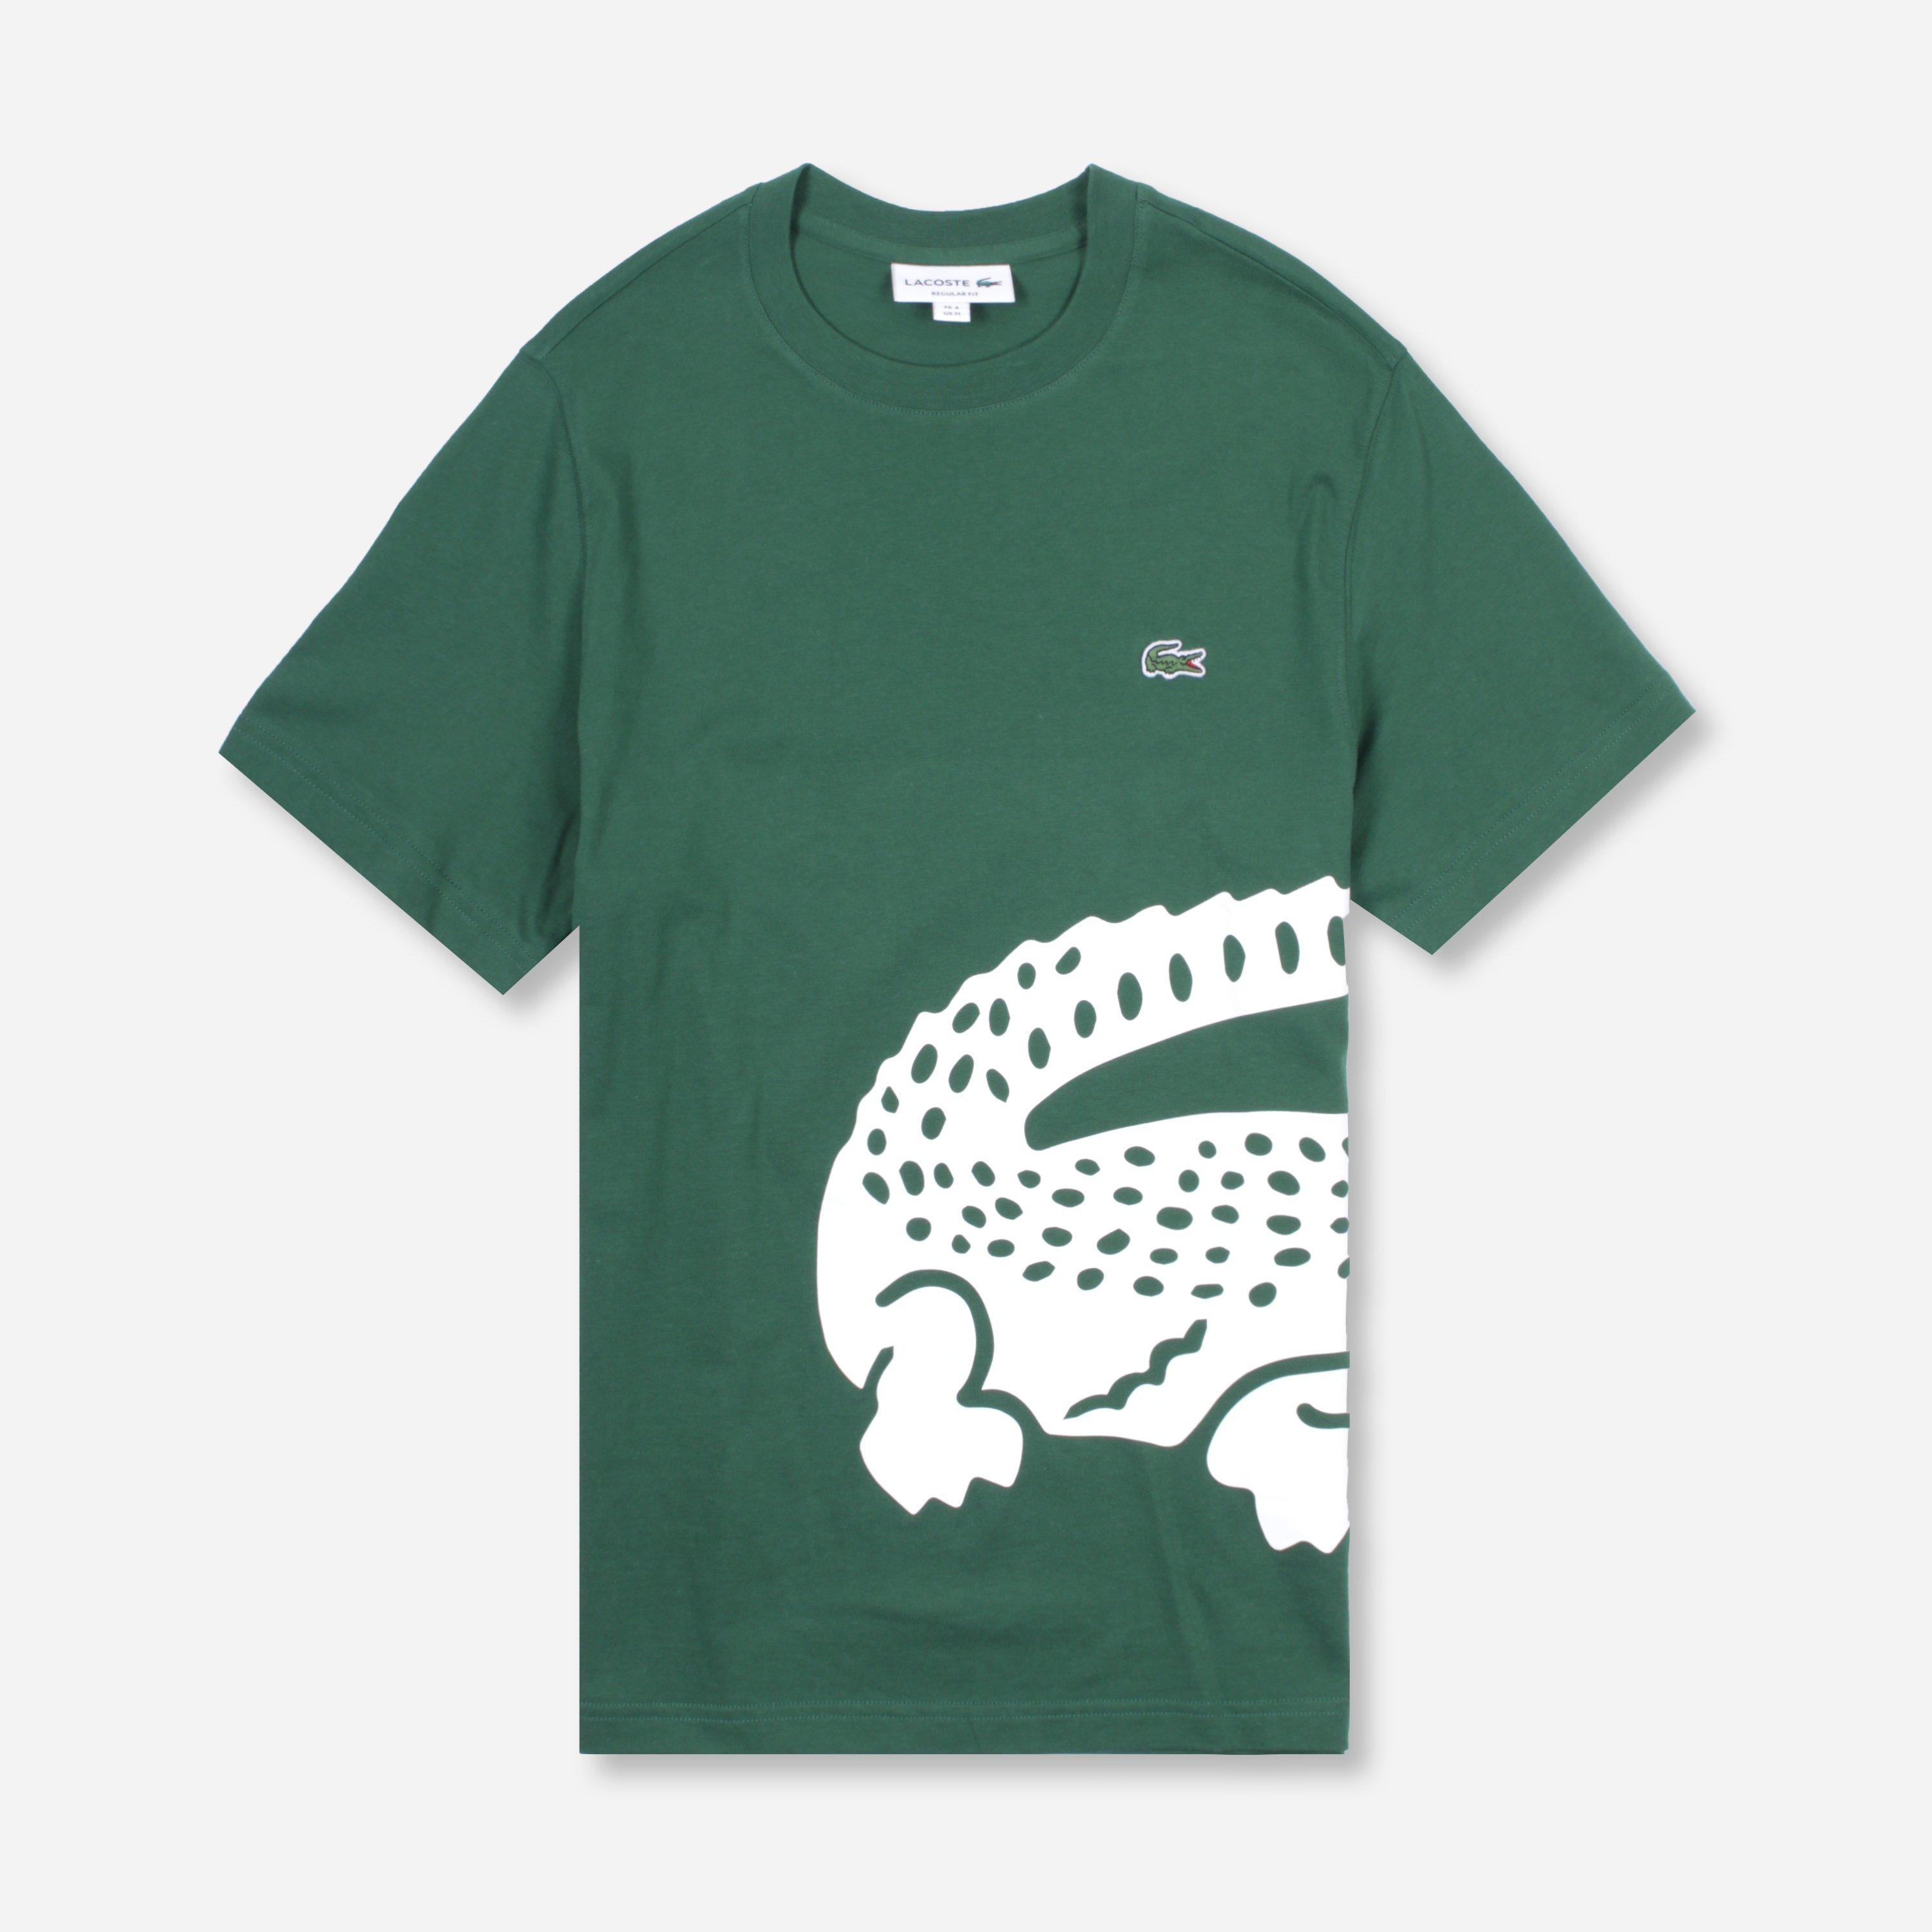 Lacoste Printed Logo T-shirt in Green for Men - Lyst